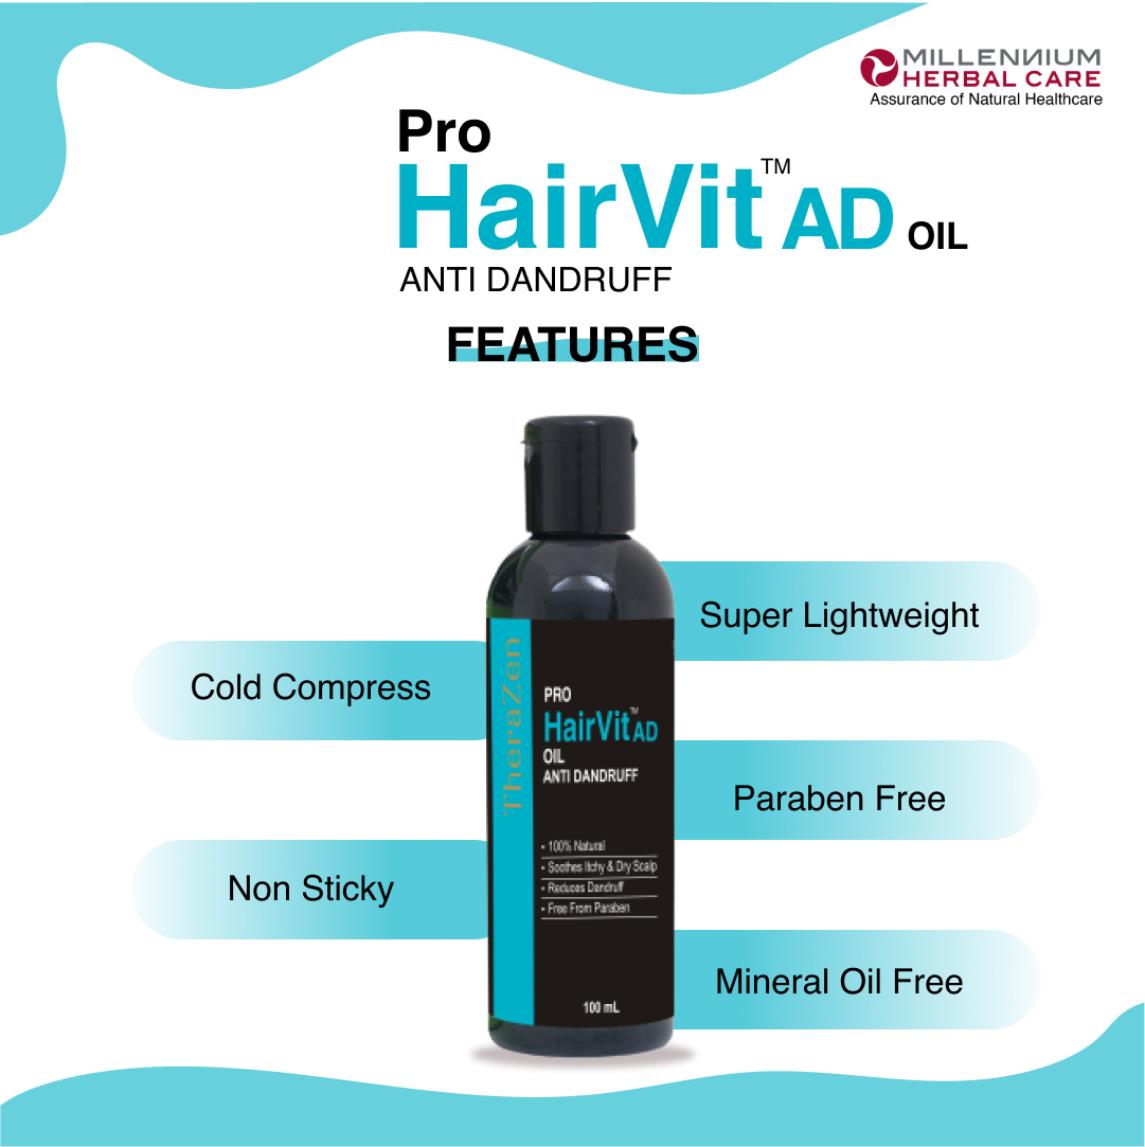 Features of Pro Hairvit AD Oil